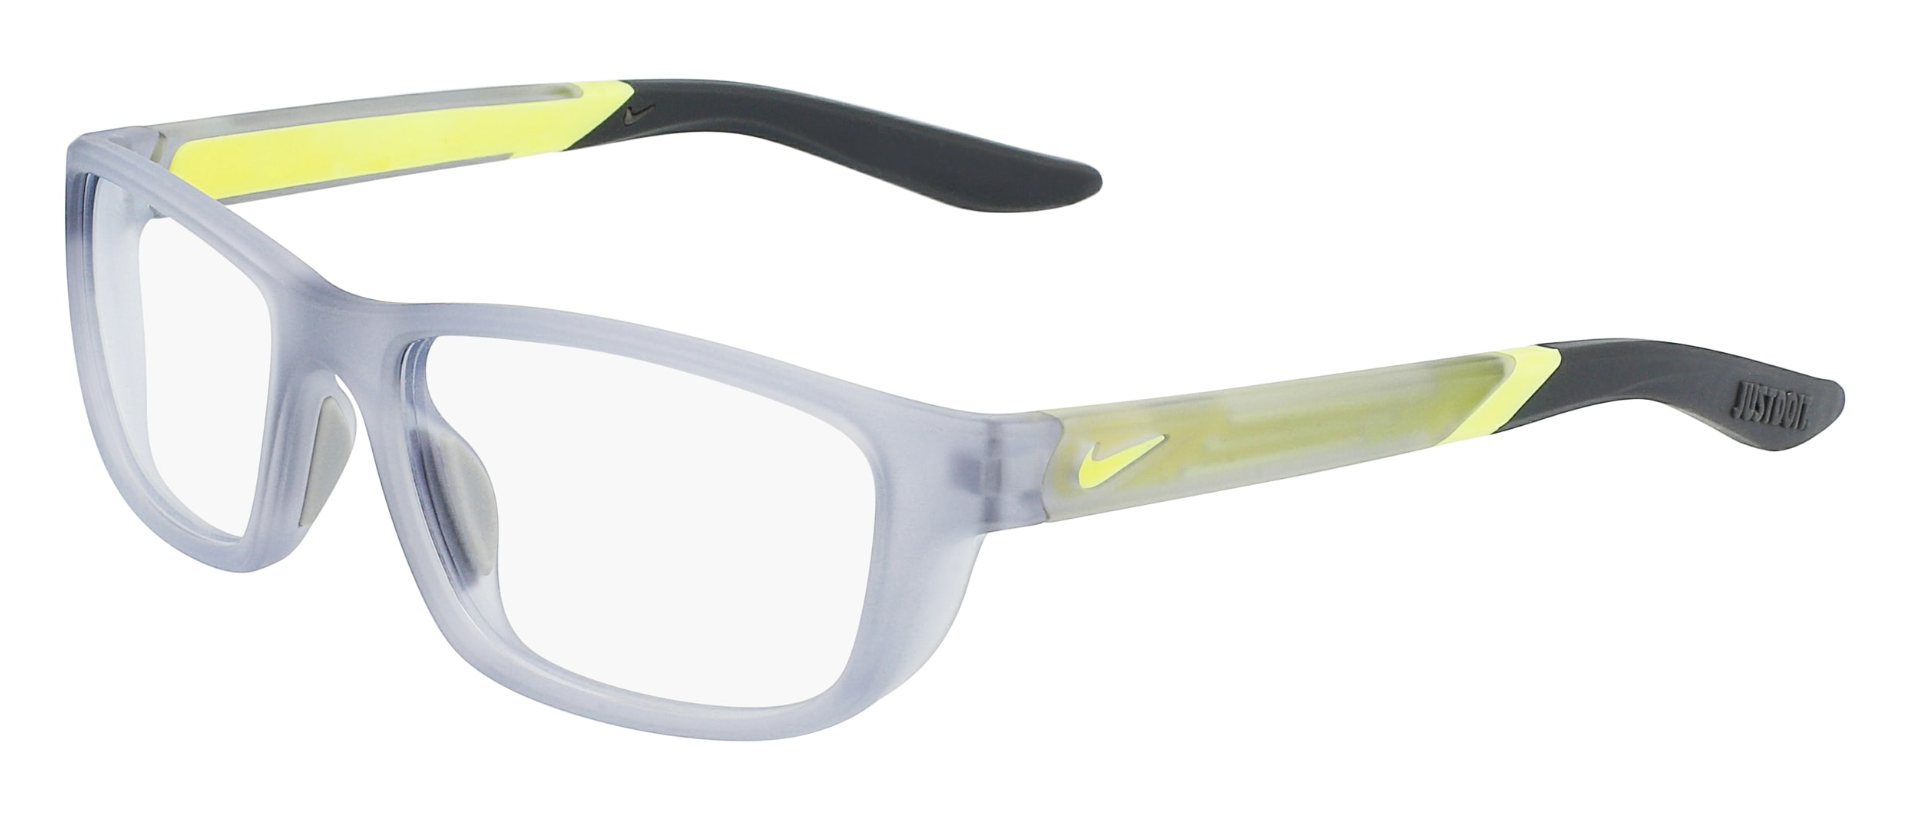 Nike 5044 kids' glasses in matte wolf grey with dark grey temple tips and lime details.